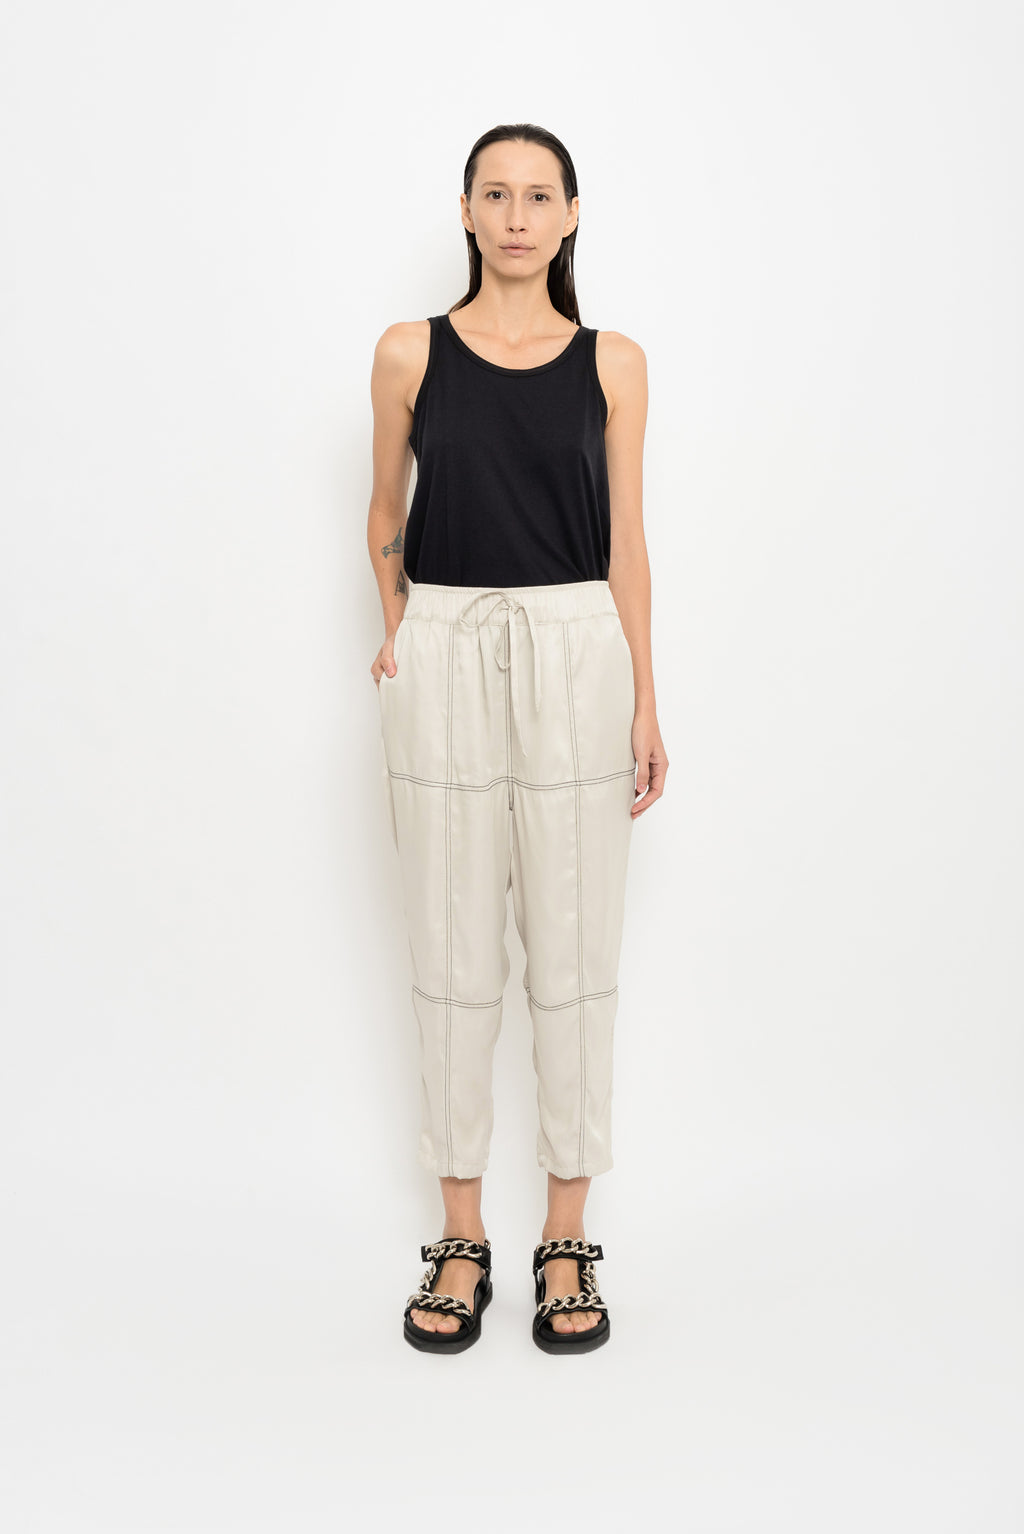 Crepe Trousers with Topstitch | Cardeal